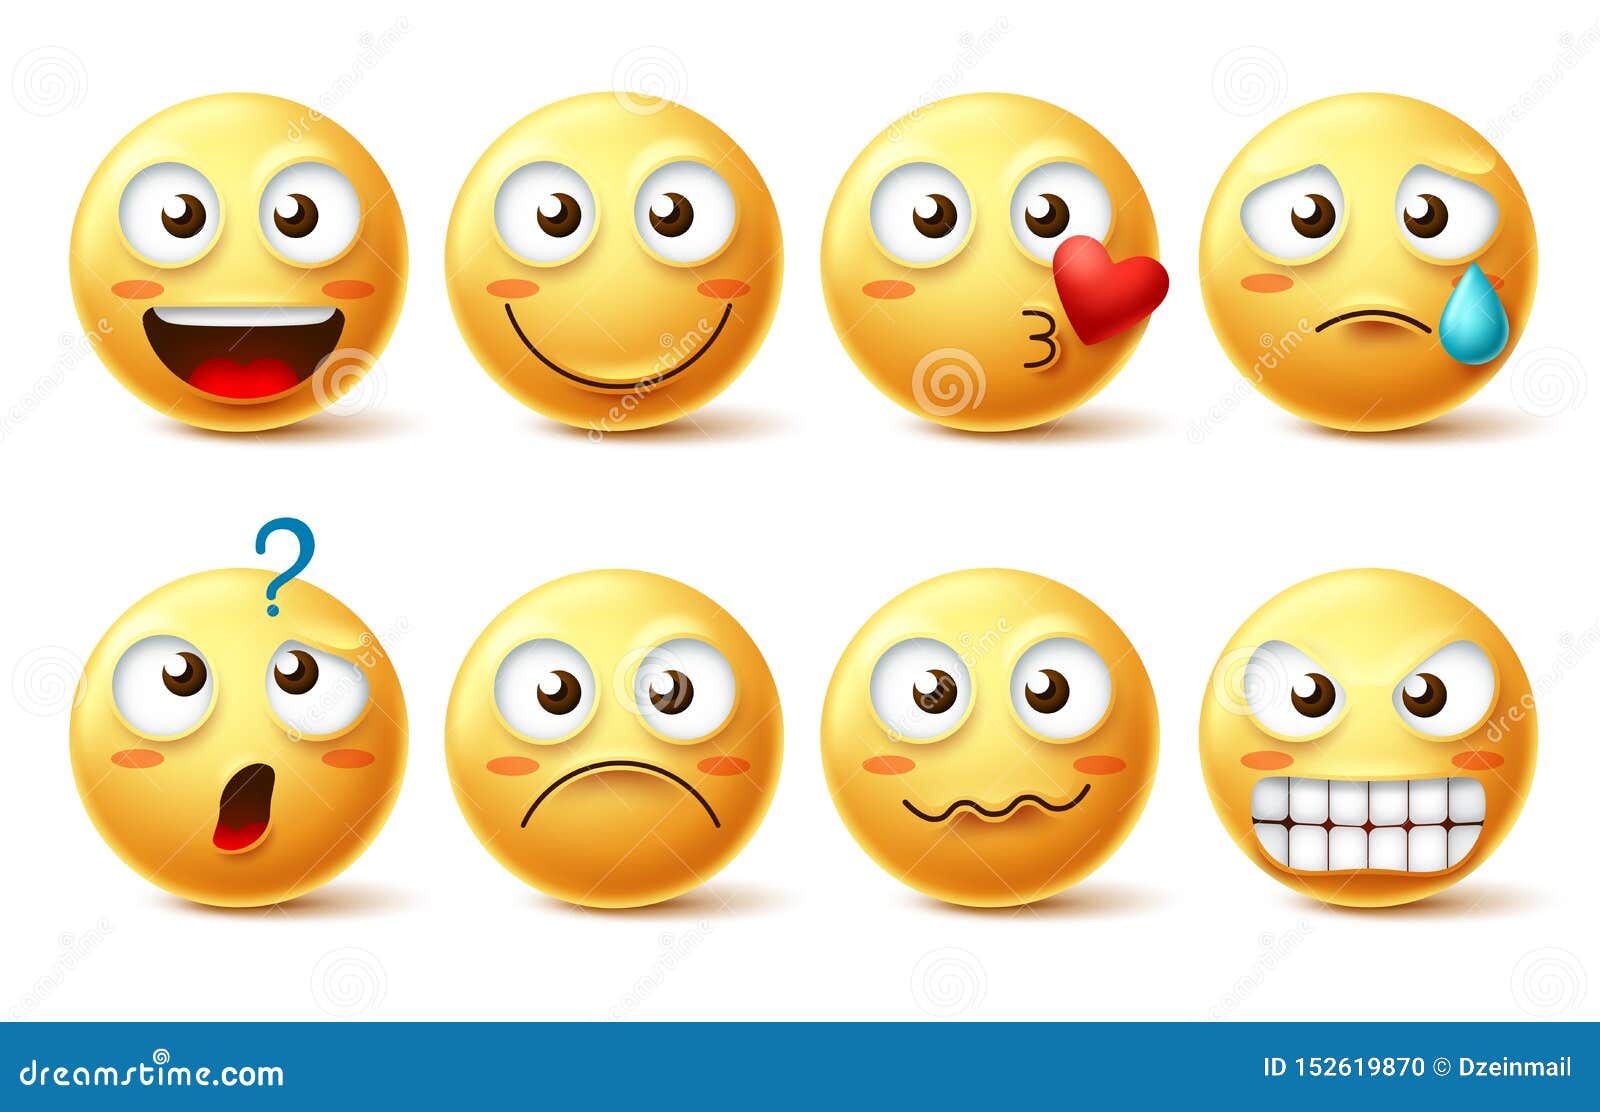 Smiley Face Vector Character Set Smiley Emoticons And Emoji With